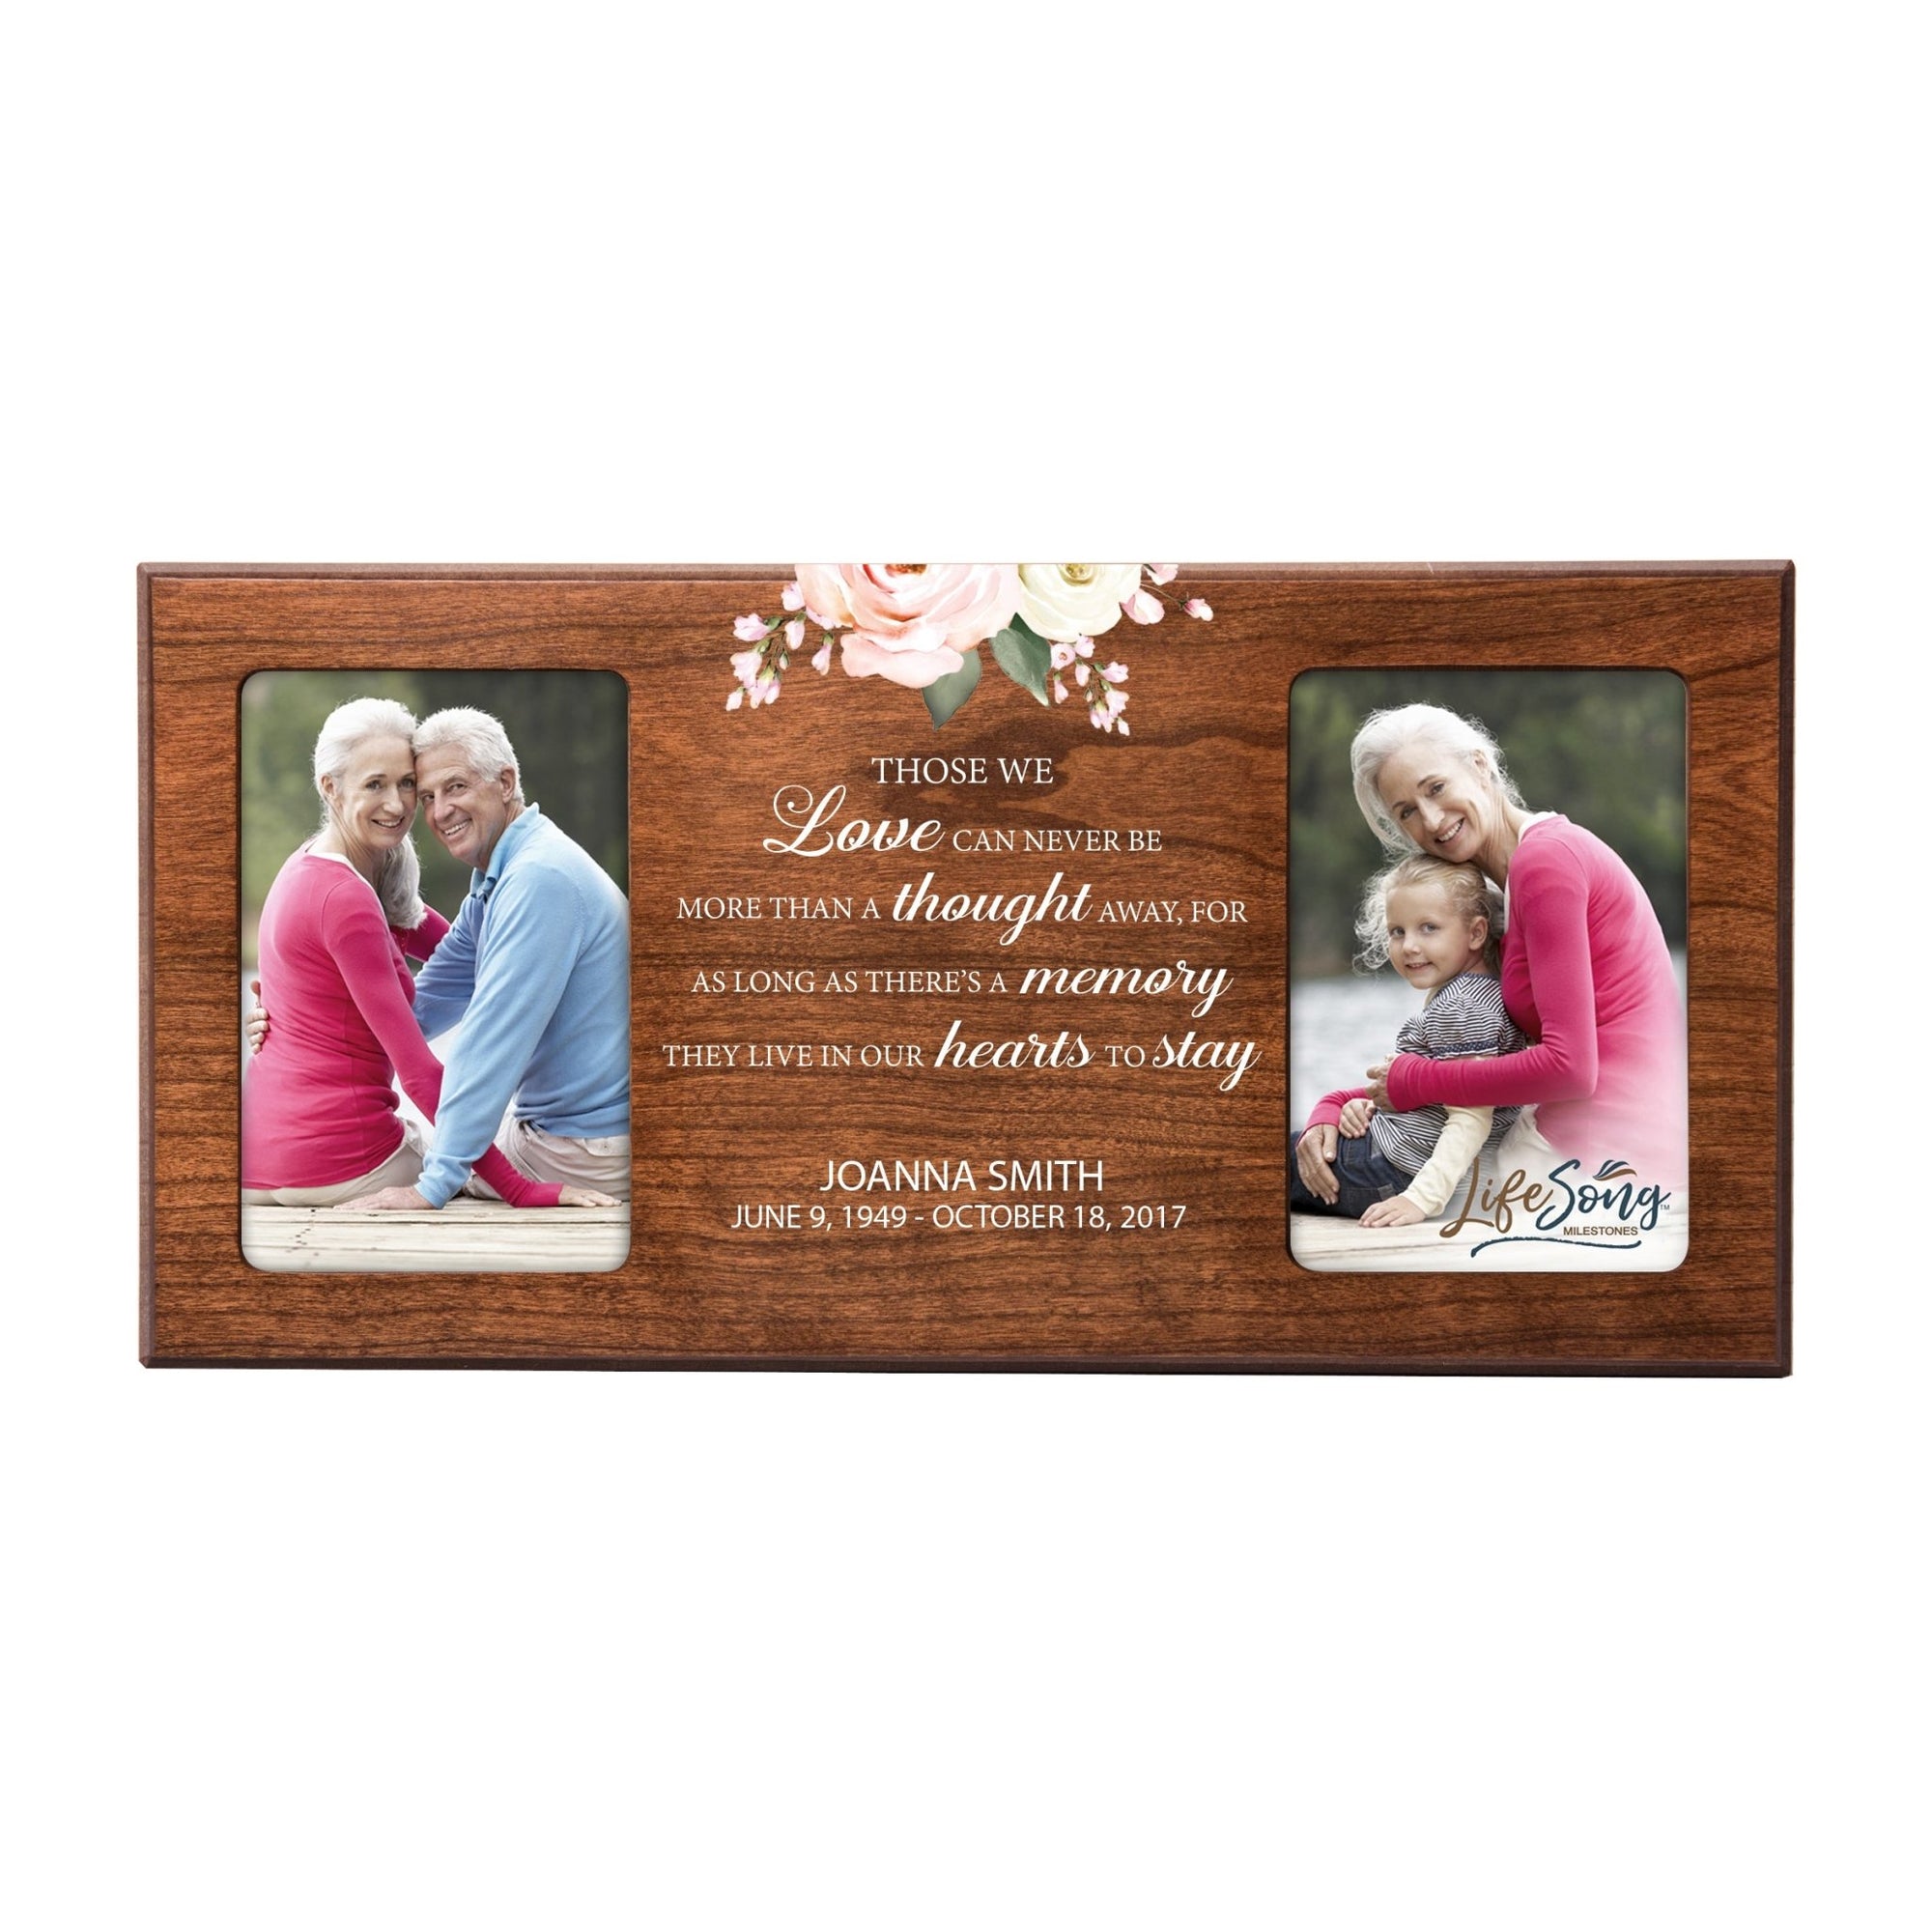 Custom Memorial Picture Frame 16x8in Holds Two 4x6in Photos - Those We Love Can Never - LifeSong Milestones